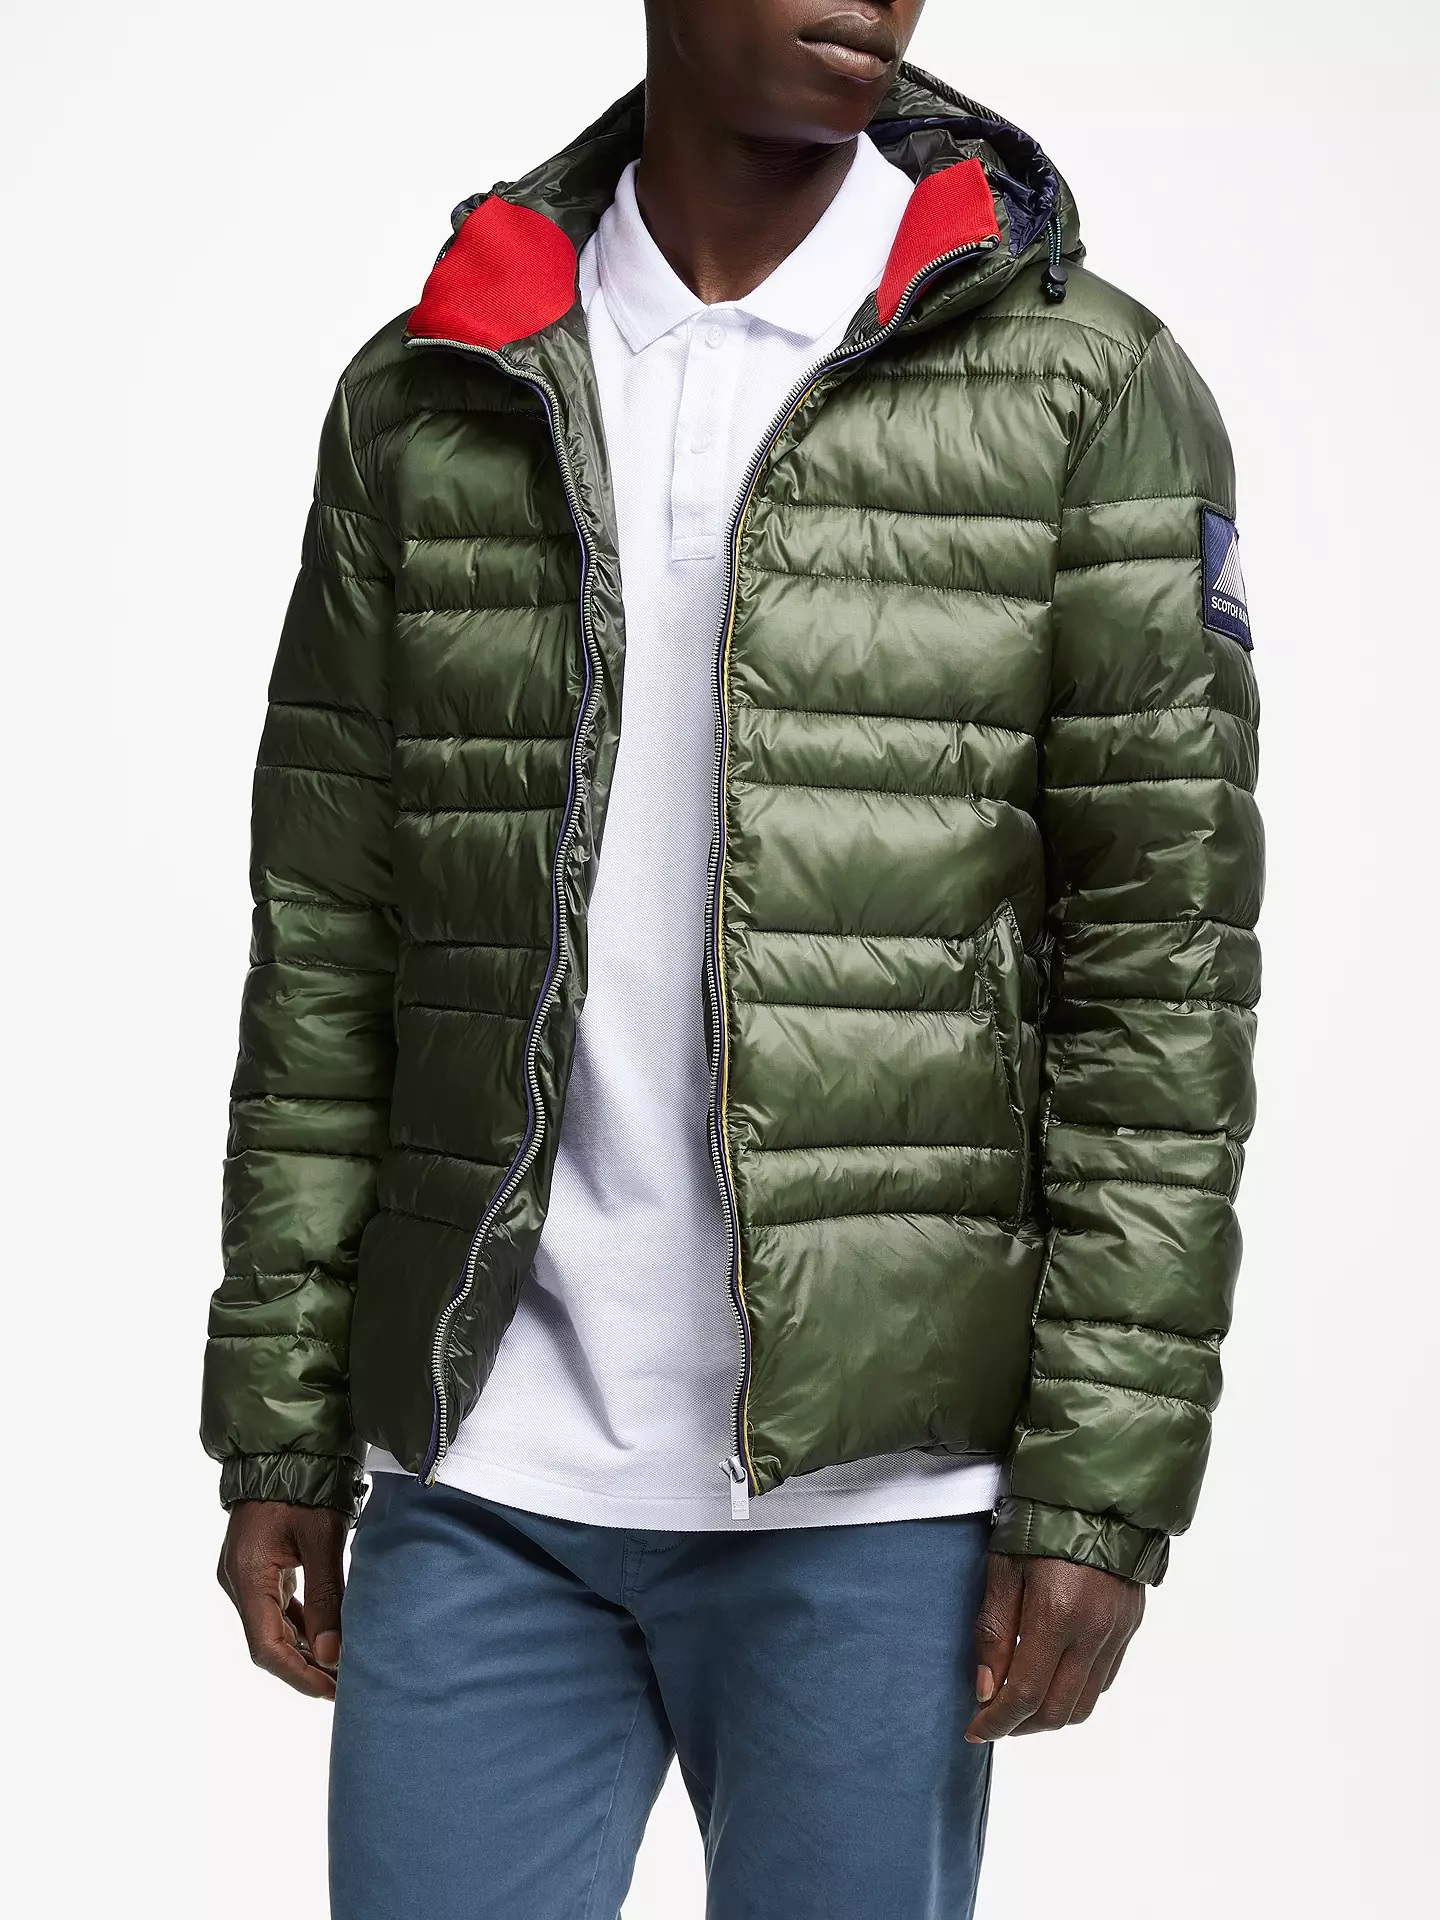 Scotch & Soda MED GREEN Quilted Primaloft Puffer Jacket, US X-Large - image 2 of 3